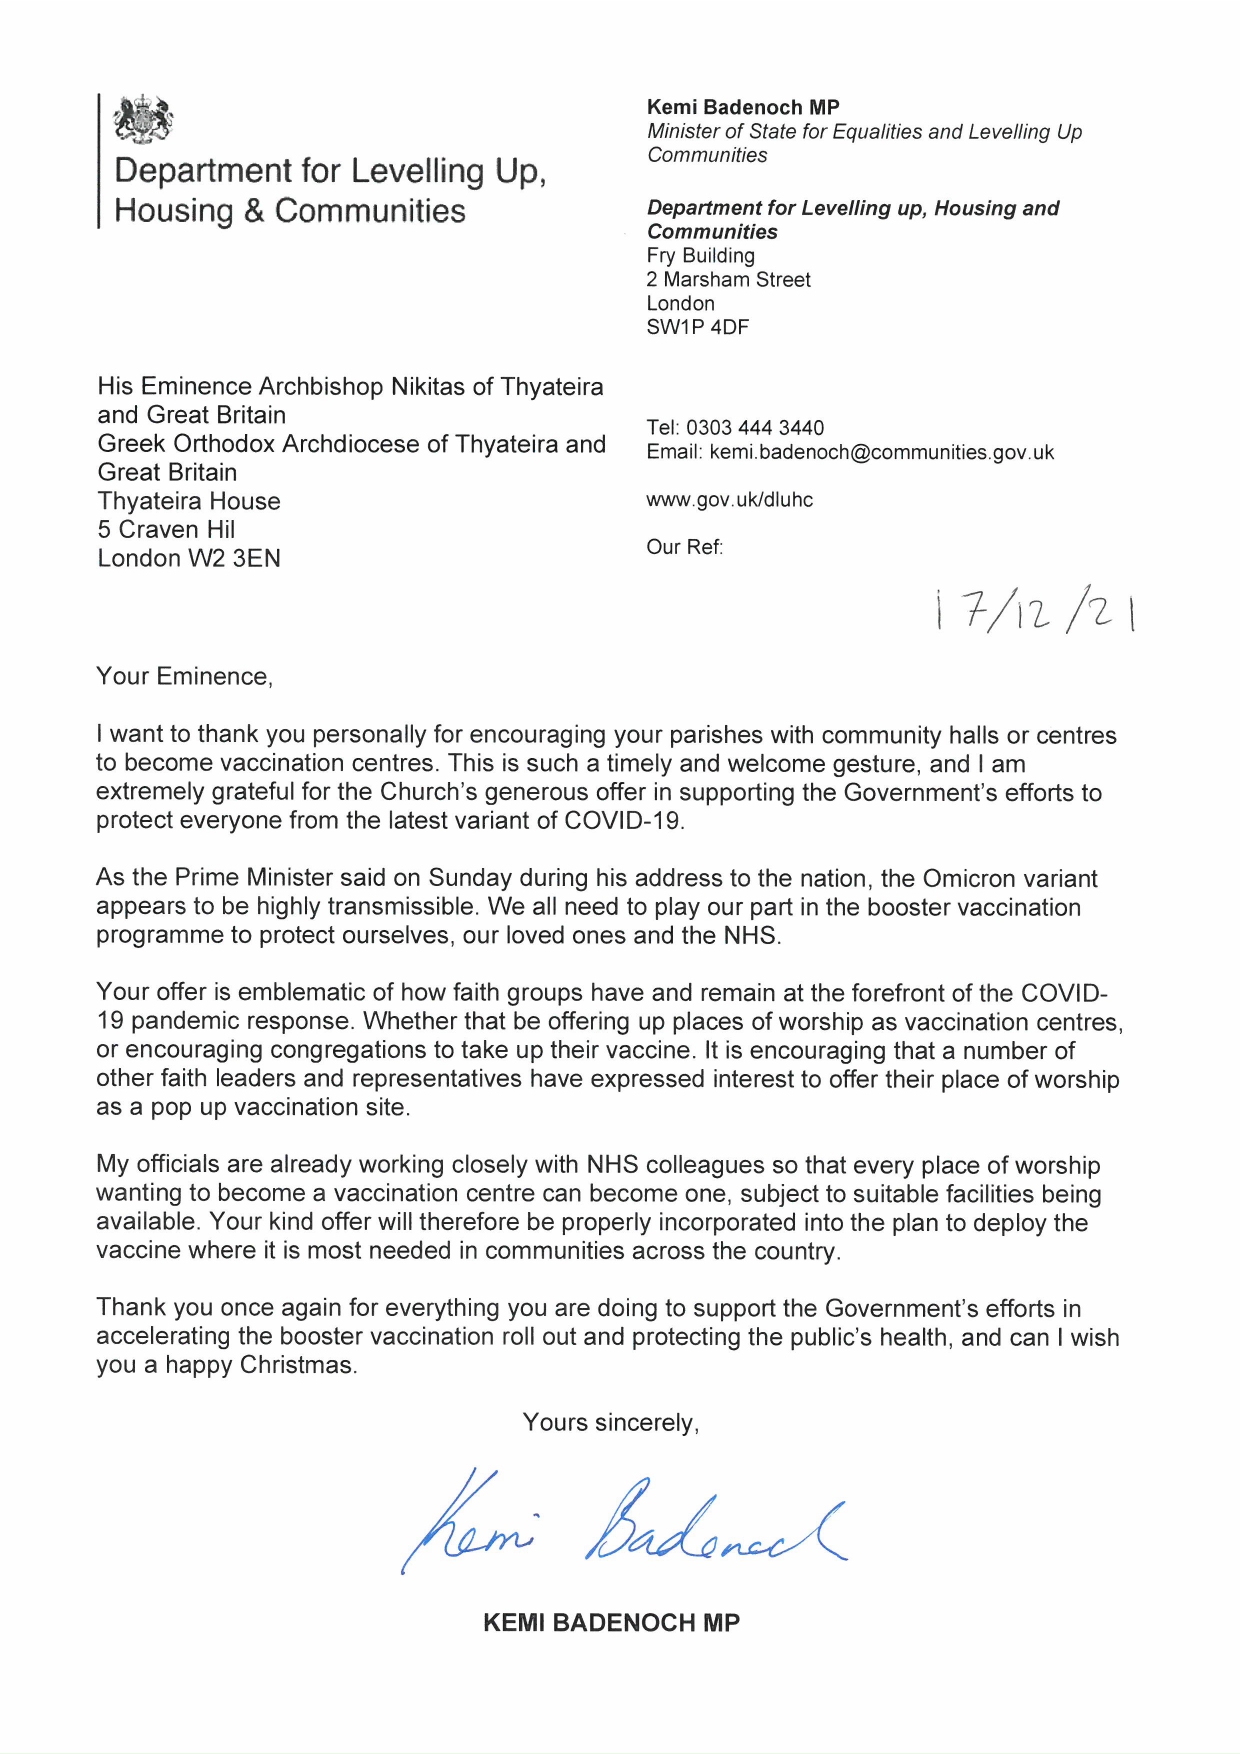 Correspondence from Minister Badenoch